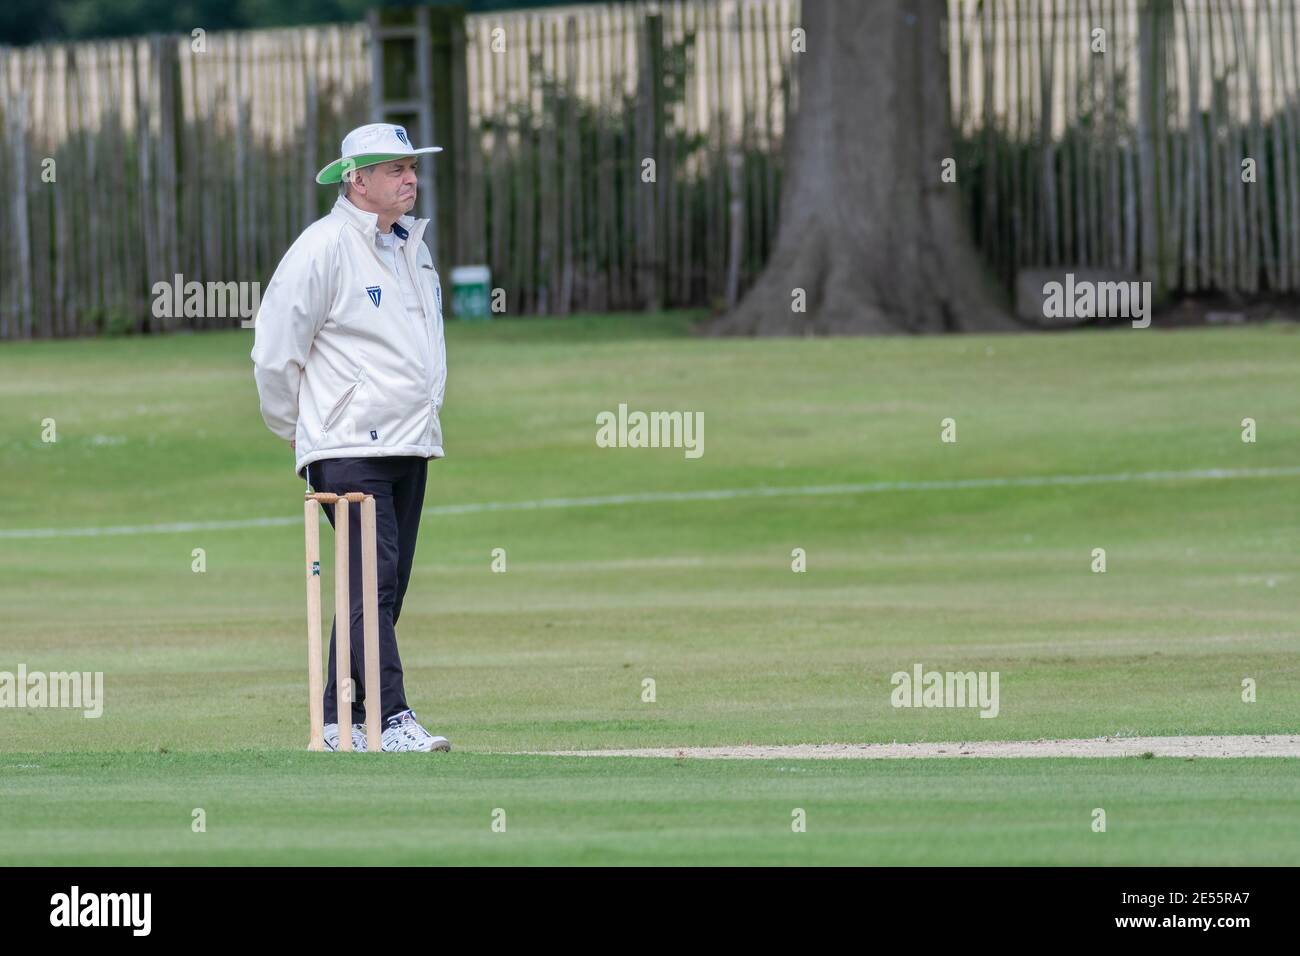 Umpire stands beside the stumps looking down the wicket at an amateur cricket match in Perth, Scotland. Stock Photo